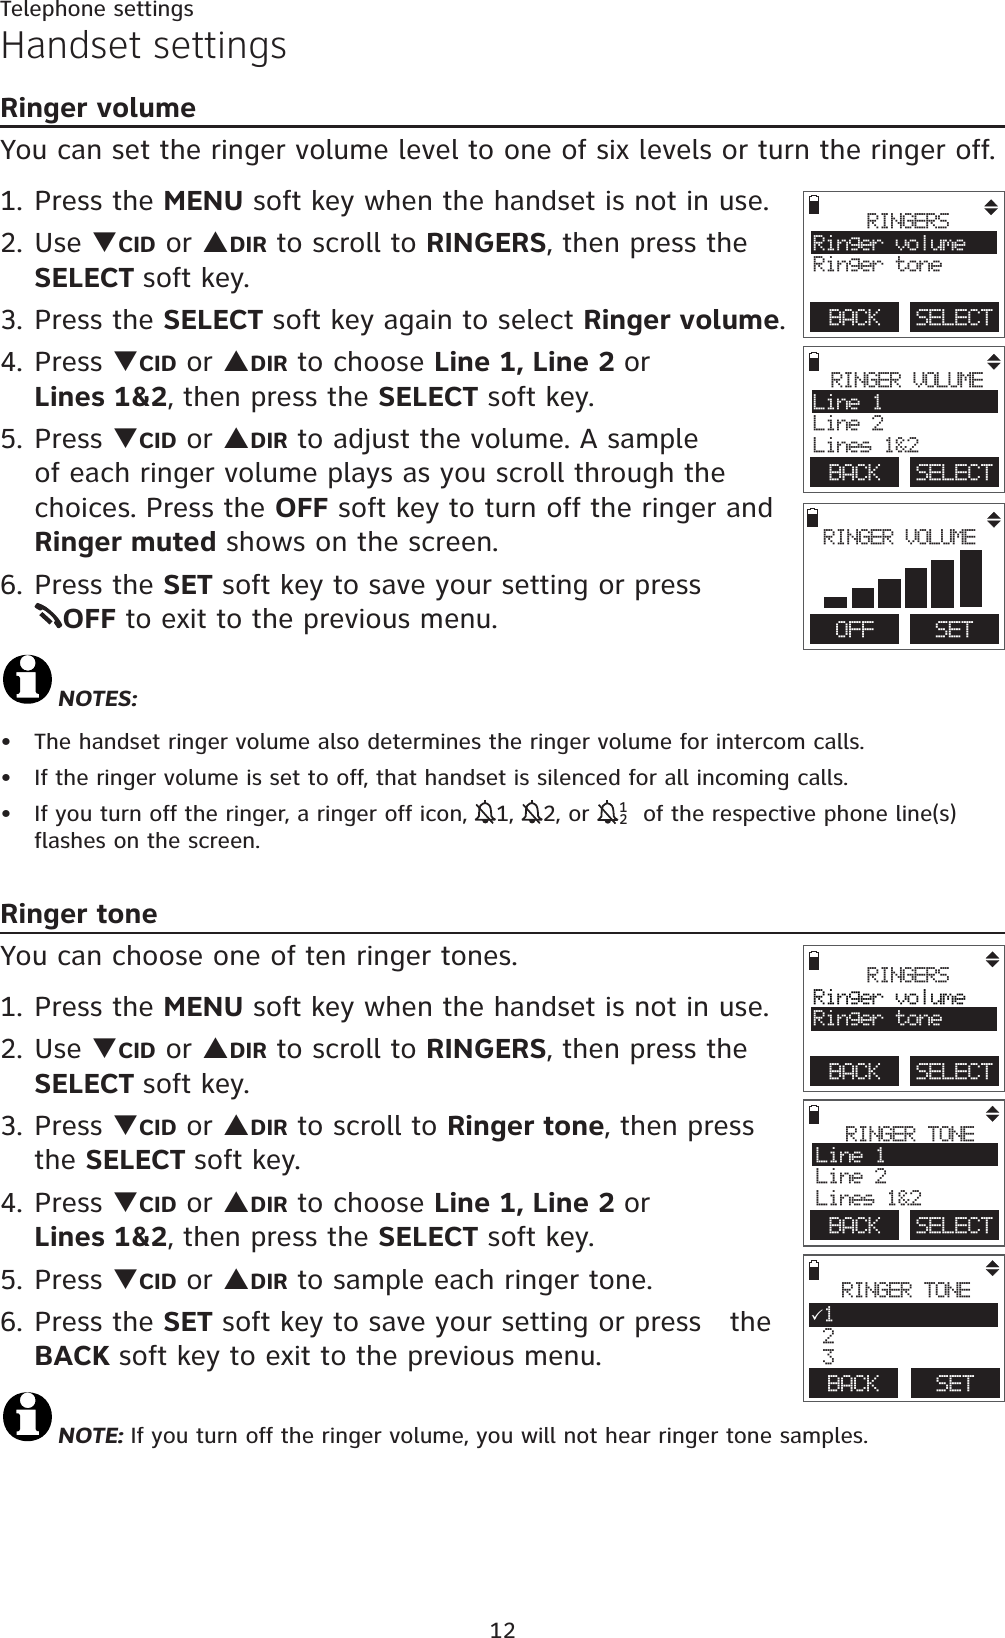 12Telephone settingsHandset settingsRinger volumeYou can set the ringer volume level to one of six levels or turn the ringer off. 1. Press the MENU soft key when the handset is not in use.2. Use TCID or SDIR to scroll to RINGERS, then press the SELECT soft key.3. Press the SELECT soft key again to select Ringer volume.4. Press TCID or SDIR to choose Line 1, Line 2 orLines 1&amp;2, then press the SELECT soft key.5. Press TCID or SDIR to adjust the volume. A sample of each ringer volume plays as you scroll through the  choices. Press the OFF soft key to turn off the ringer and Ringer muted shows on the screen.6. Press the SET soft key to save your setting or press       OFF to exit to the previous menu.NOTES:The handset ringer volume also determines the ringer volume for intercom calls.If the ringer volume is set to off, that handset is silenced for all incoming calls.If you turn off the ringer, a ringer off icon, 11,12, or  121 of the respective phone line(s) flashes on the screen. Ringer toneYou can choose one of ten ringer tones.1. Press the MENU soft key when the handset is not in use.2. Use TCID or SDIR to scroll to RINGERS, then press the SELECT soft key.3. Press TCID or SDIR to scroll to Ringer tone, then press the SELECT soft key.4. Press TCID or SDIR to choose Line 1, Line 2 orLines 1&amp;2, then press the SELECT soft key. 5. Press TCID or SDIR to sample each ringer tone.6. Press the SET soft key to save your setting or press   the BACK soft key to exit to the previous menu.NOTE: If you turn off the ringer volume, you will not hear ringer tone samples.•••BACK    SELECTRINGERSRinger volumeRinger toneBACK    SELECTRINGER VOLUMELine 1Line 2Lines 1&amp;2        OFF   SETRINGER VOLUMEBACK    SELECTRINGERSRinger volumeRinger toneBACK    SELECTRINGER TONELine 1Line 2Lines 1&amp;2BACK   RINGER TONE31 2 3SET